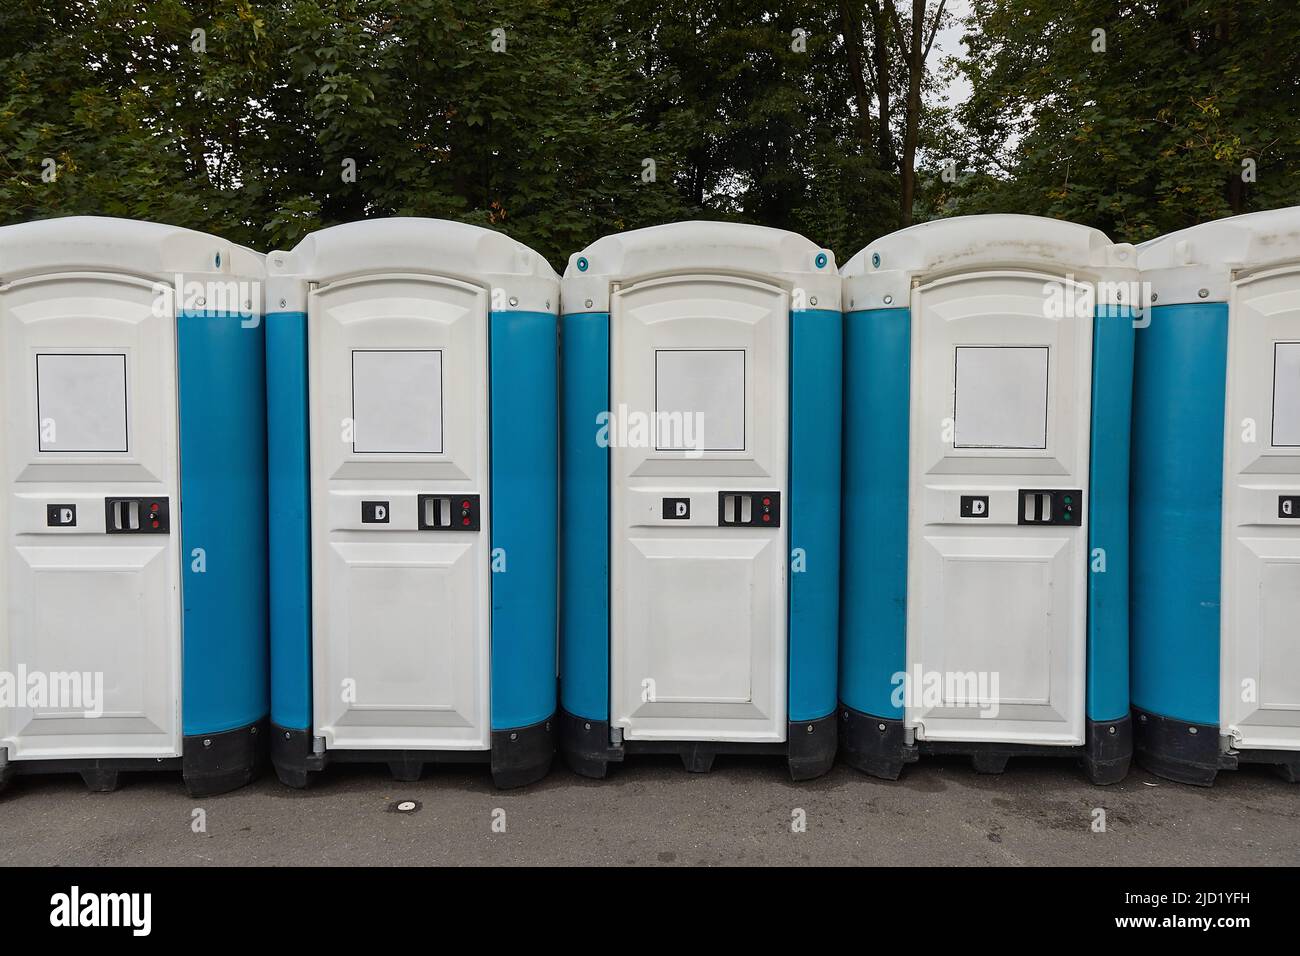 Toilets installed at a public event Stock Photo